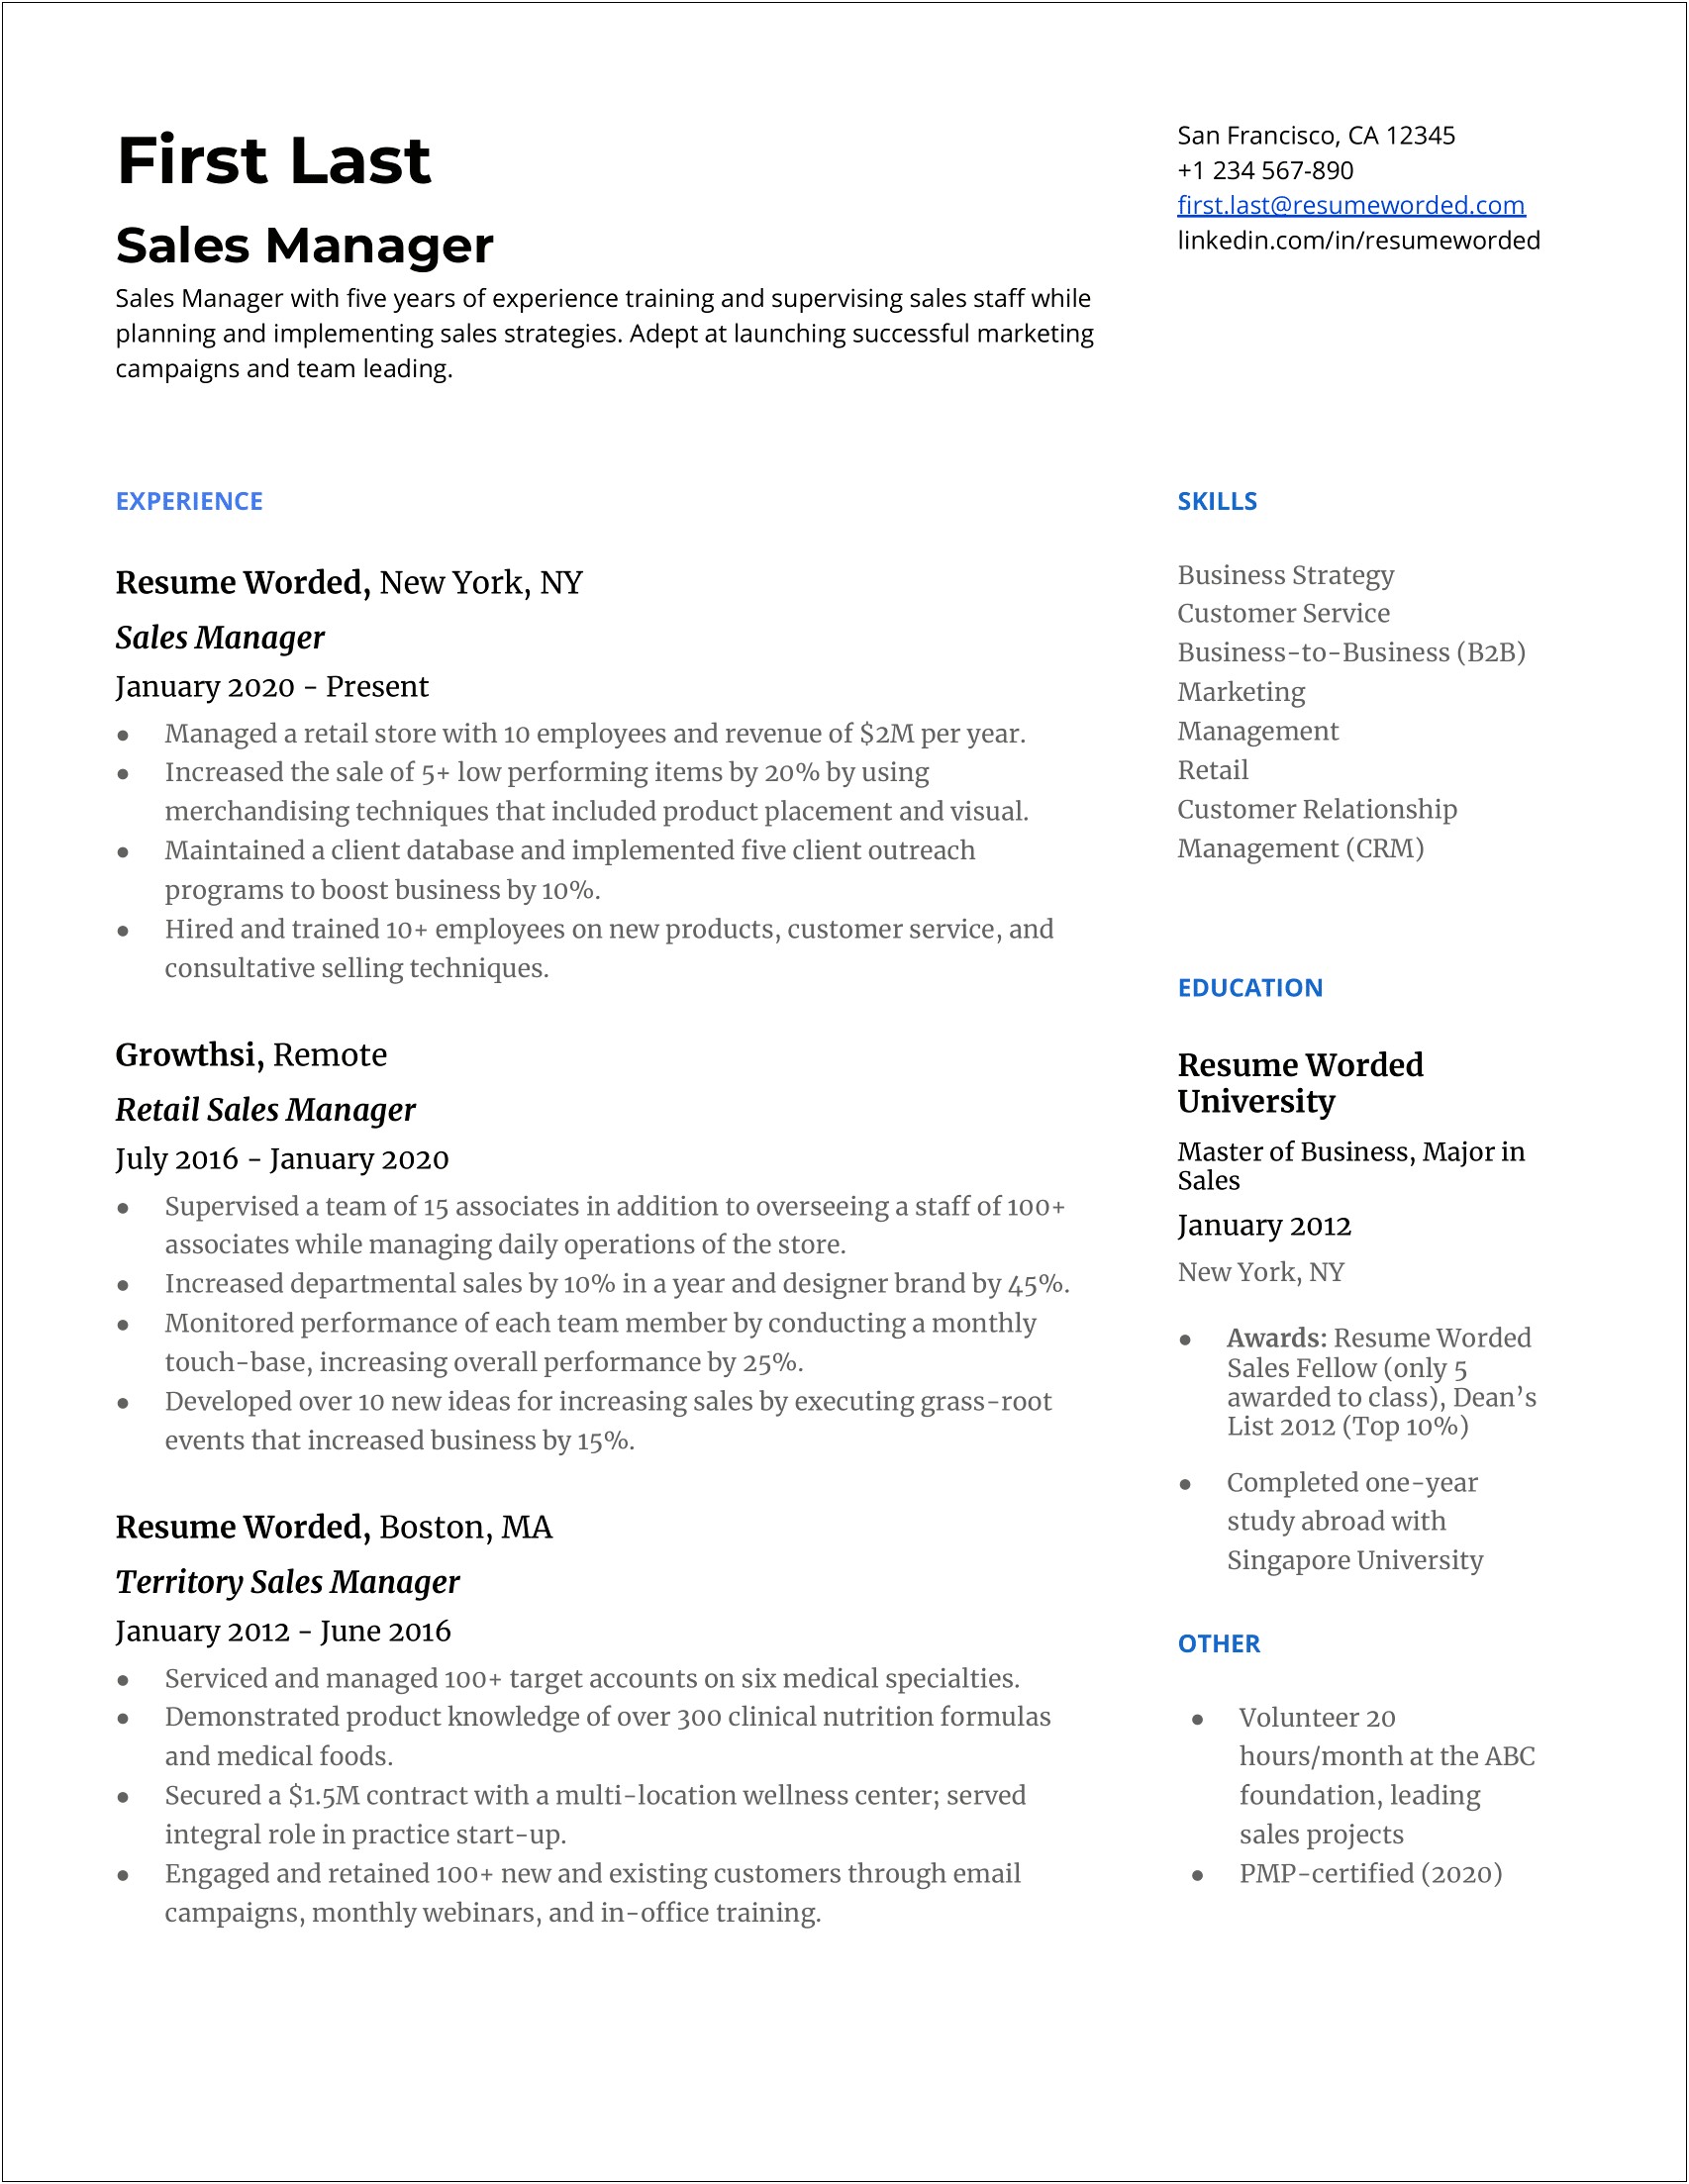 Explaining Direct Sales As A Skill On Resume